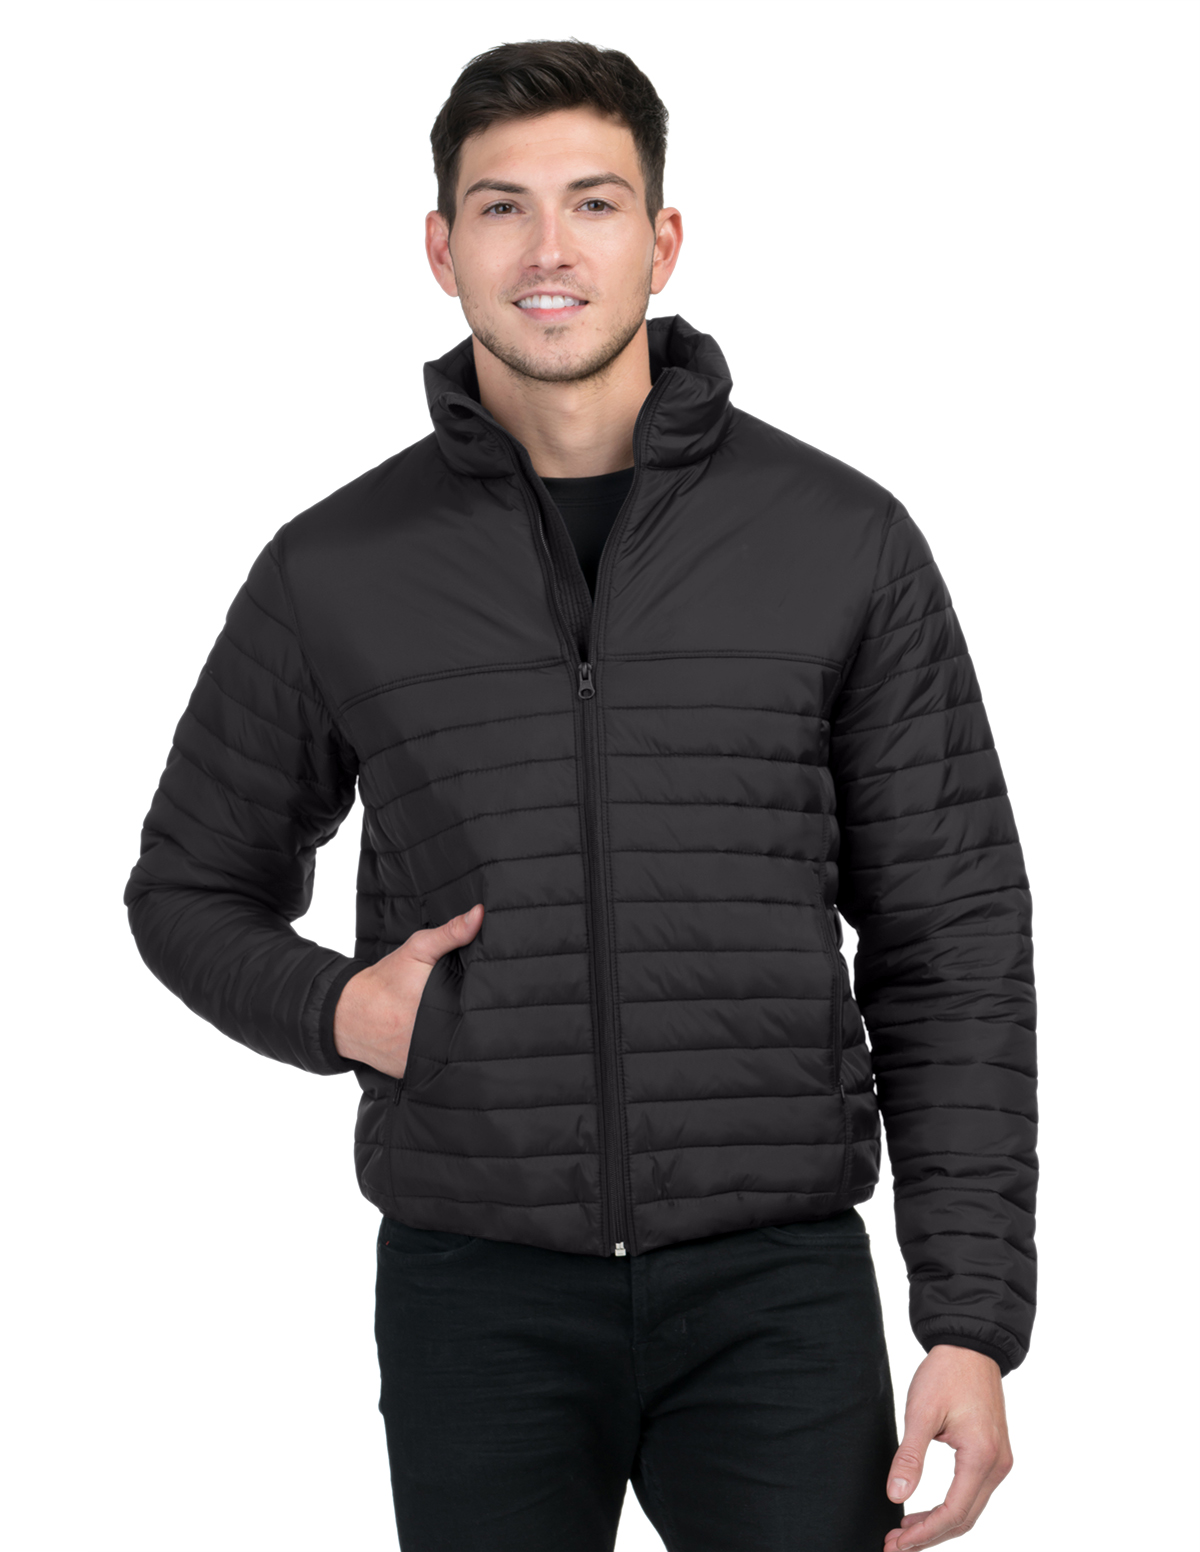 Tri-Mountain J8260 - Canby Men's Quilted Puffer Jacket $47.19 - Outerwear